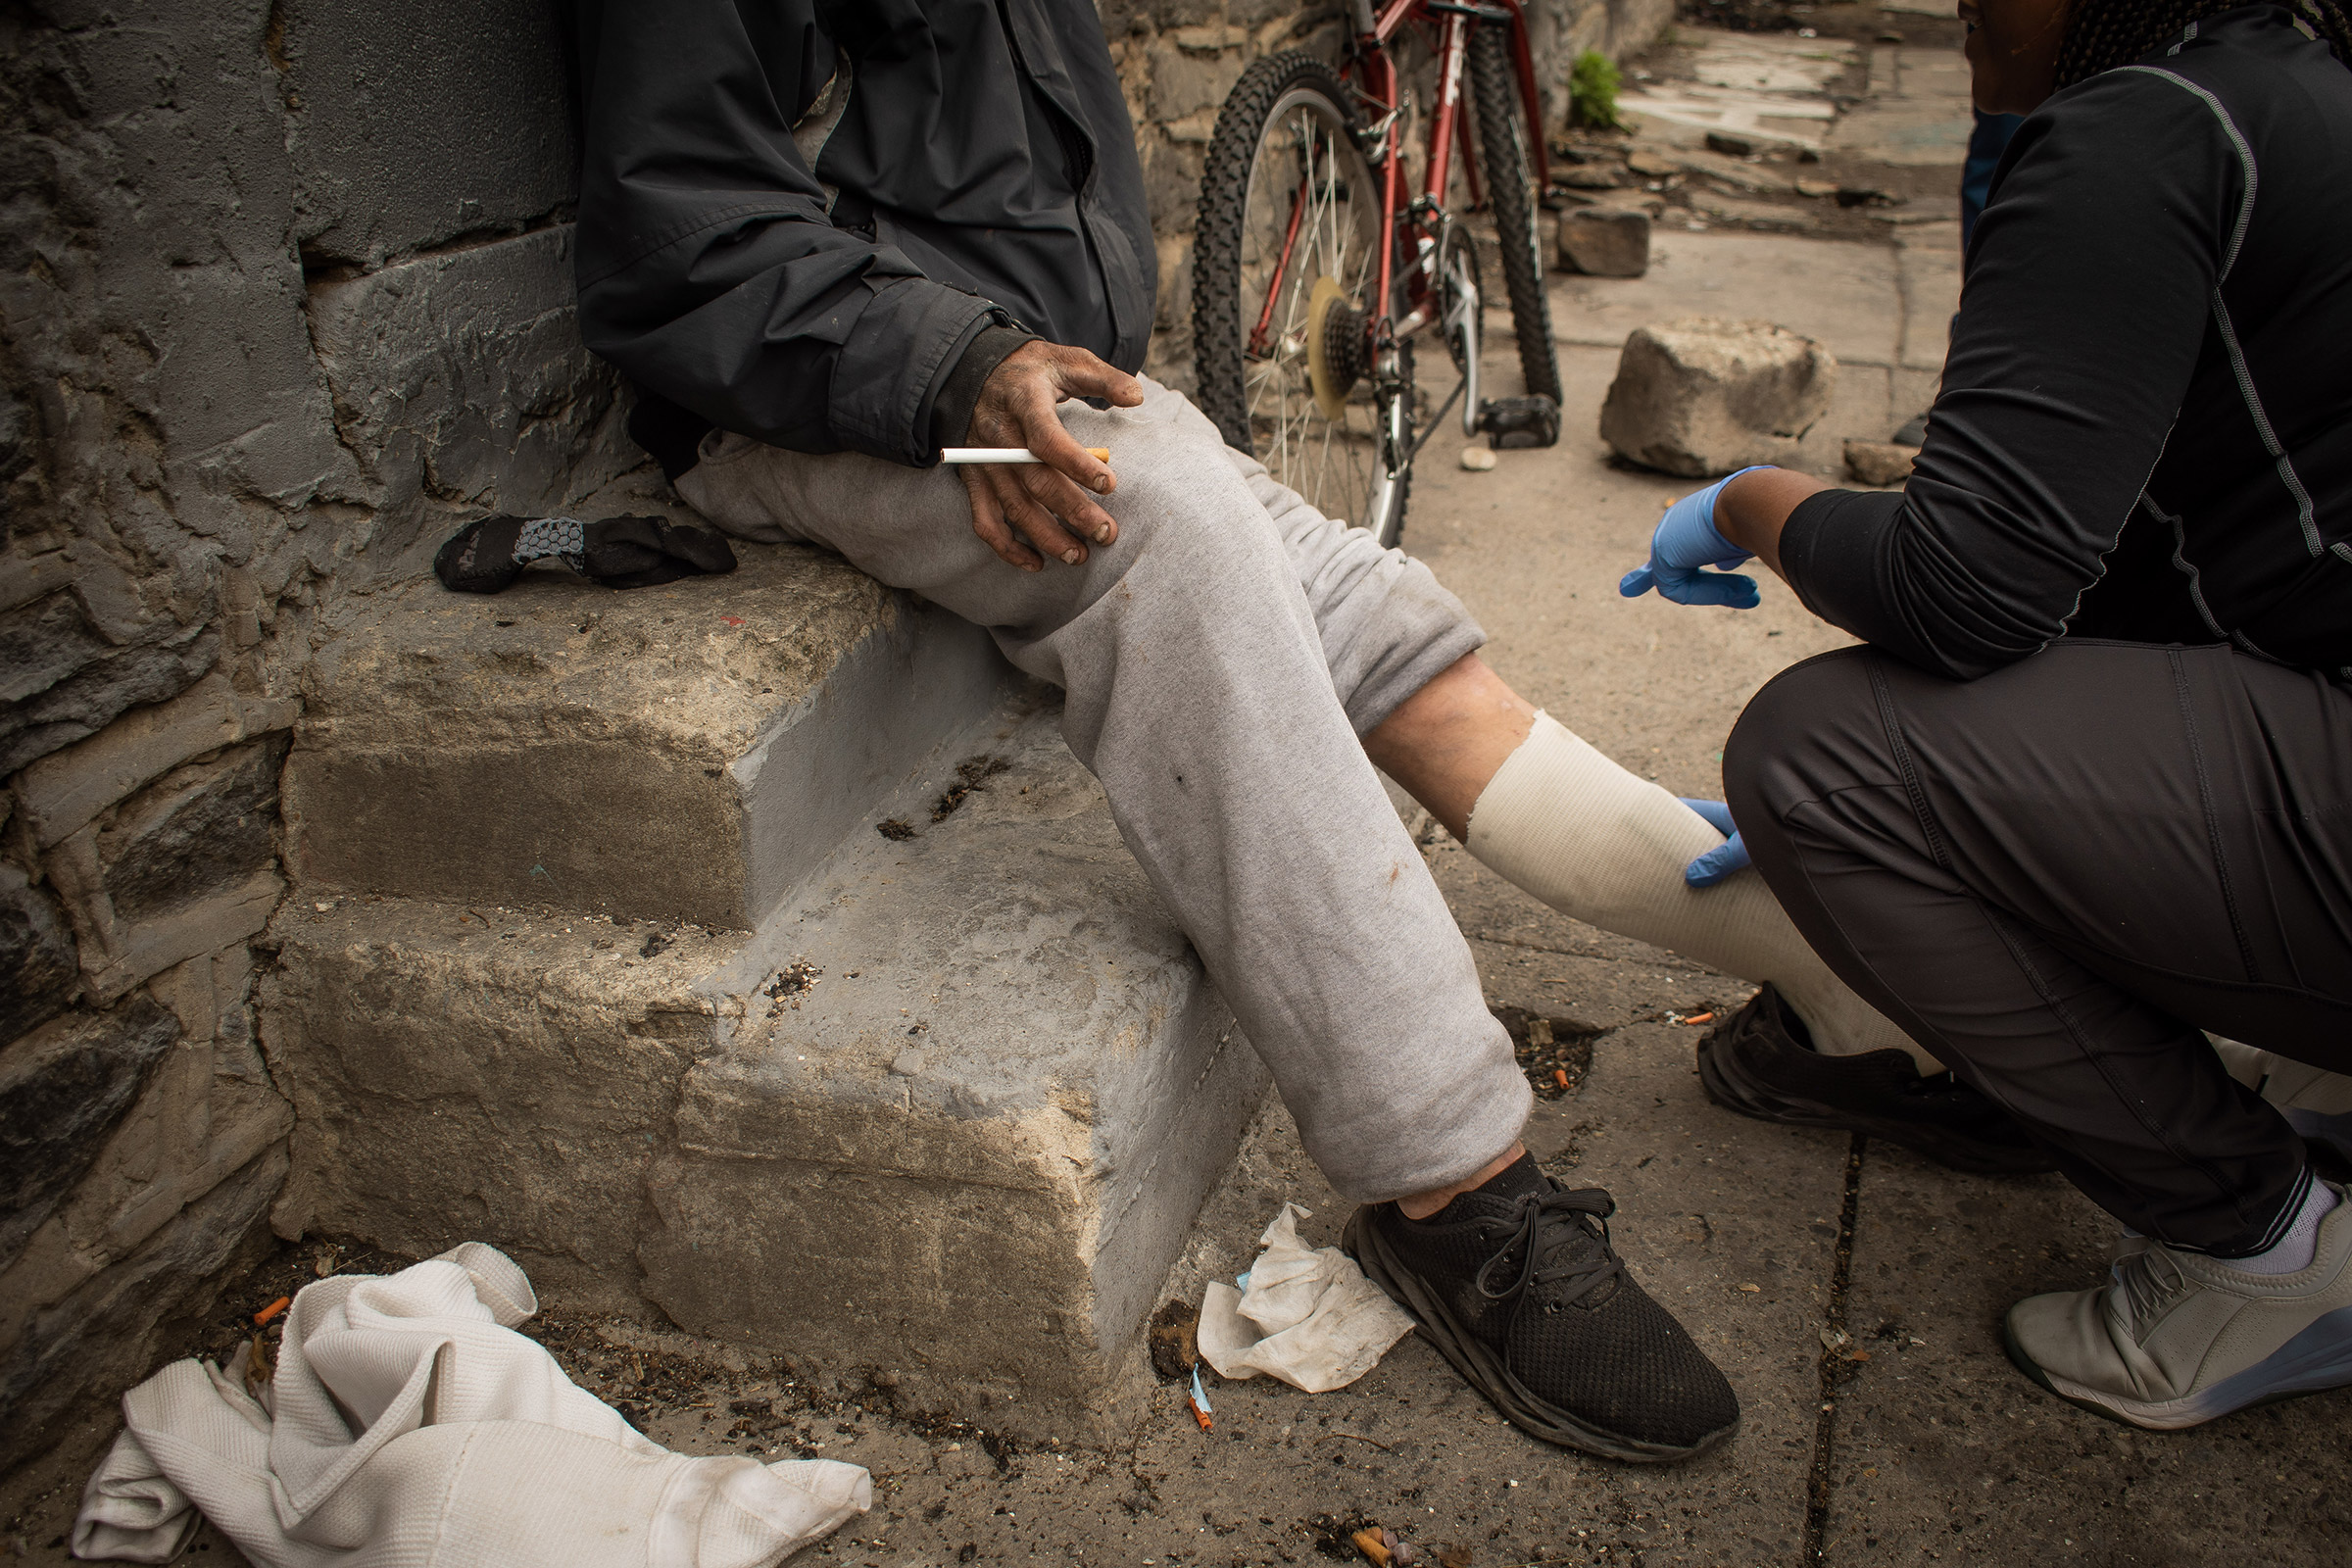 Lydia Williams, a certified wound care nurse, rebinds a patient's wounds during her shift offering street-side medical services throughout Kensington in Philadelphia, on April 19, 2023. (Anisha Kohli for TIME)